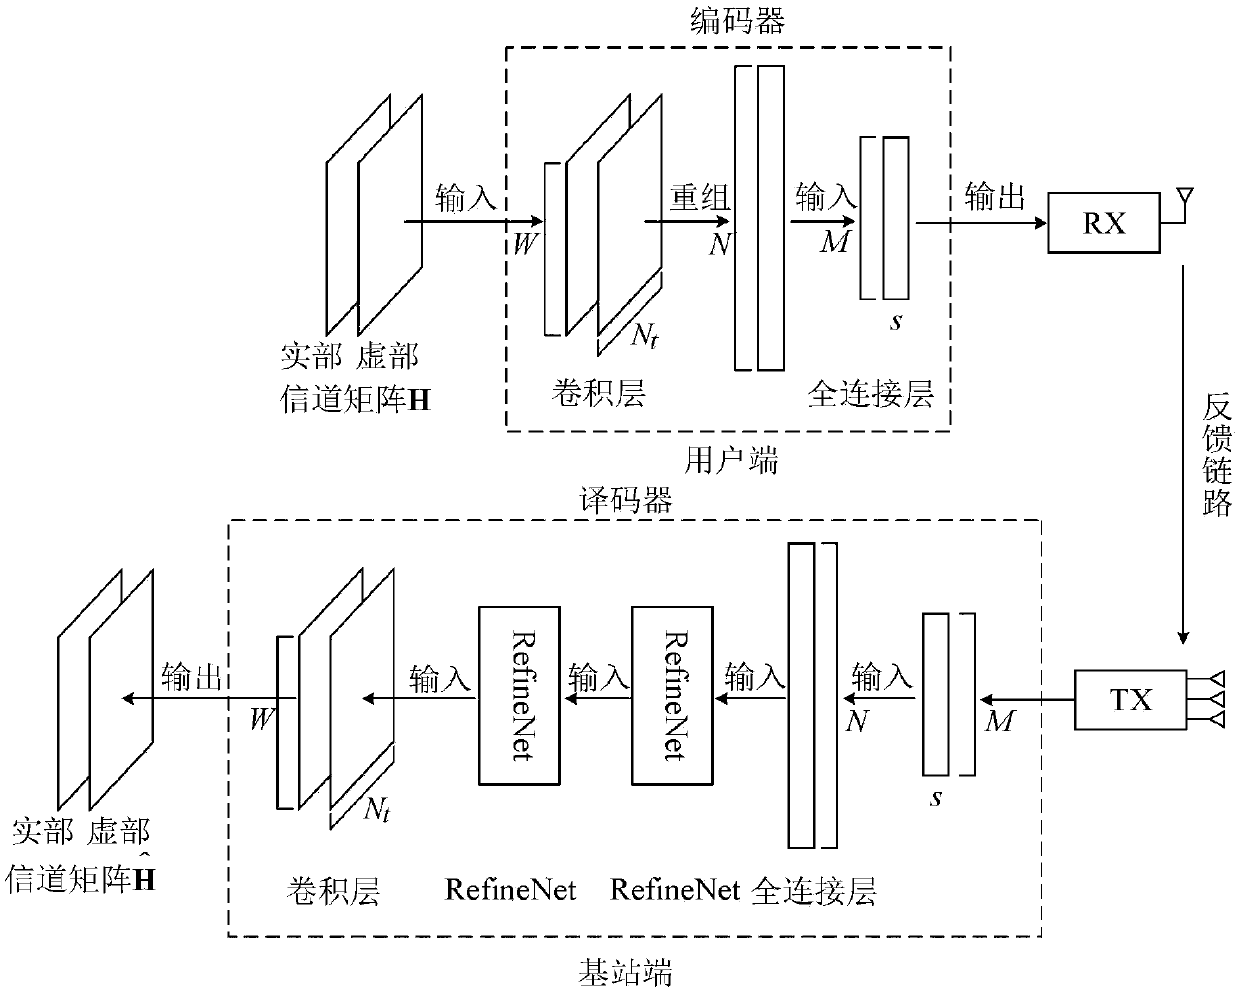 Large-scale MIMO channel state information feedback method based on deep learning